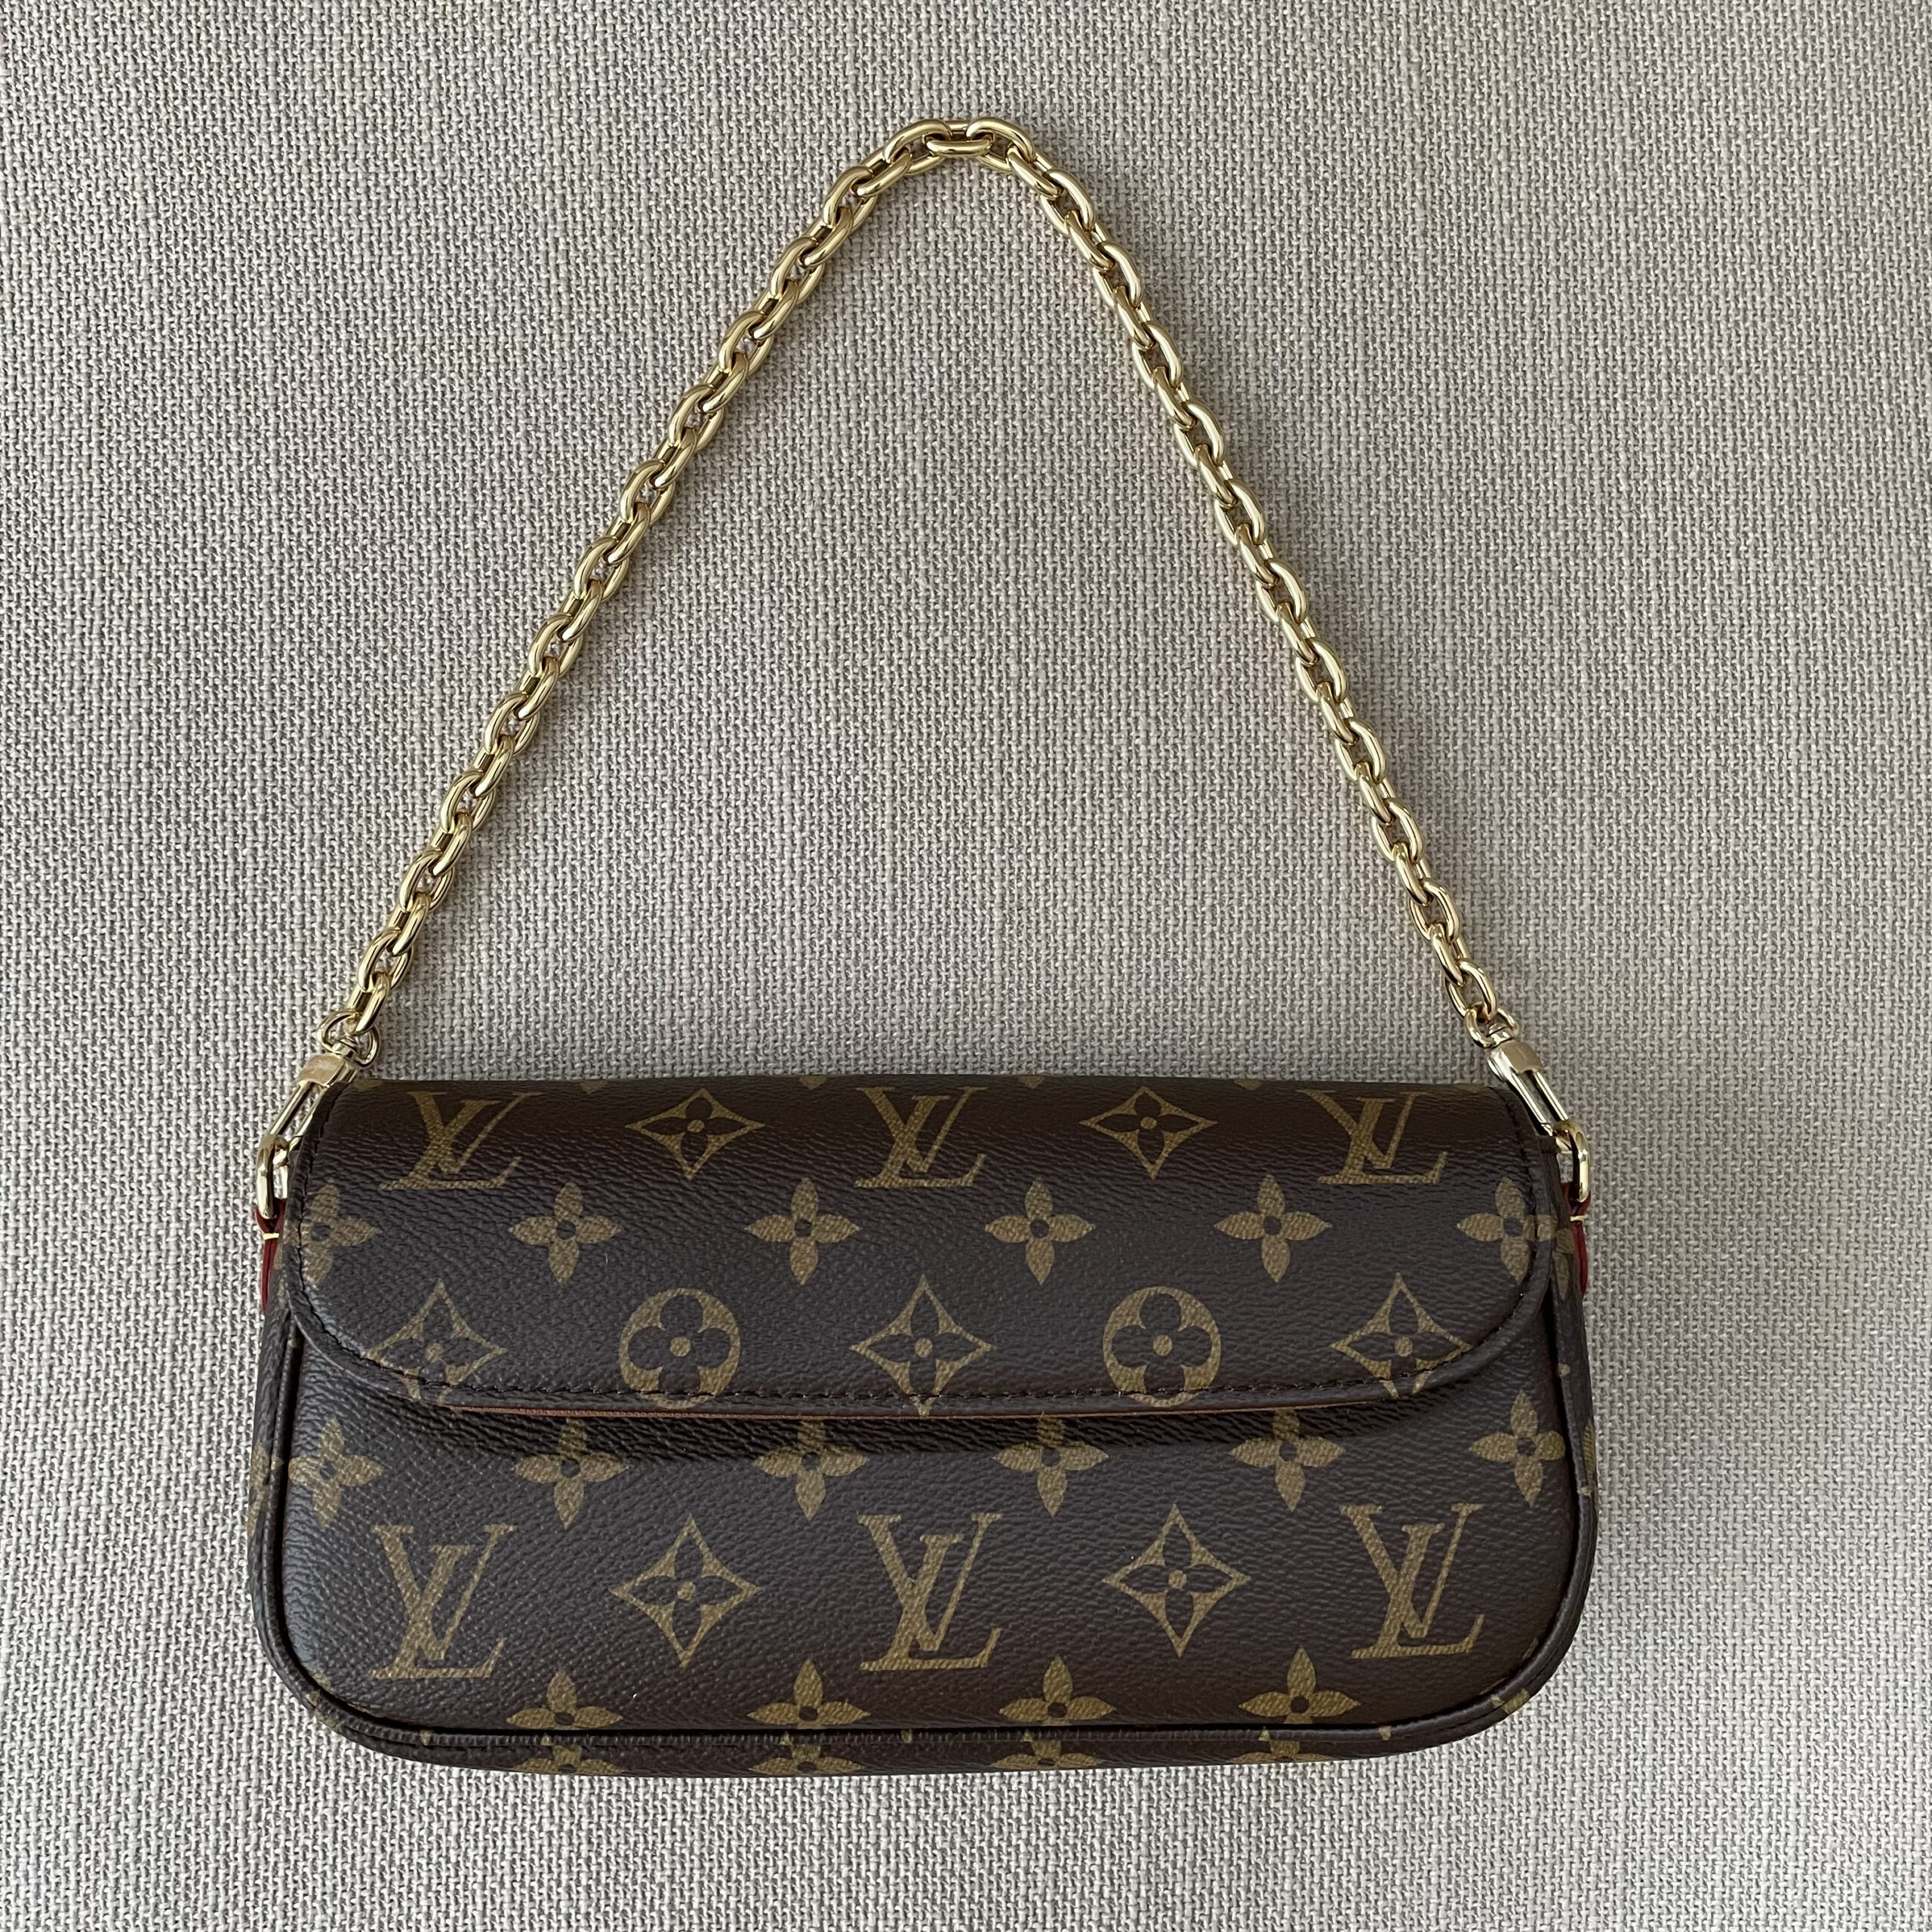 Louis Vuitton - Authenticated Ivy Handbag - Leather Brown for Women, Good Condition